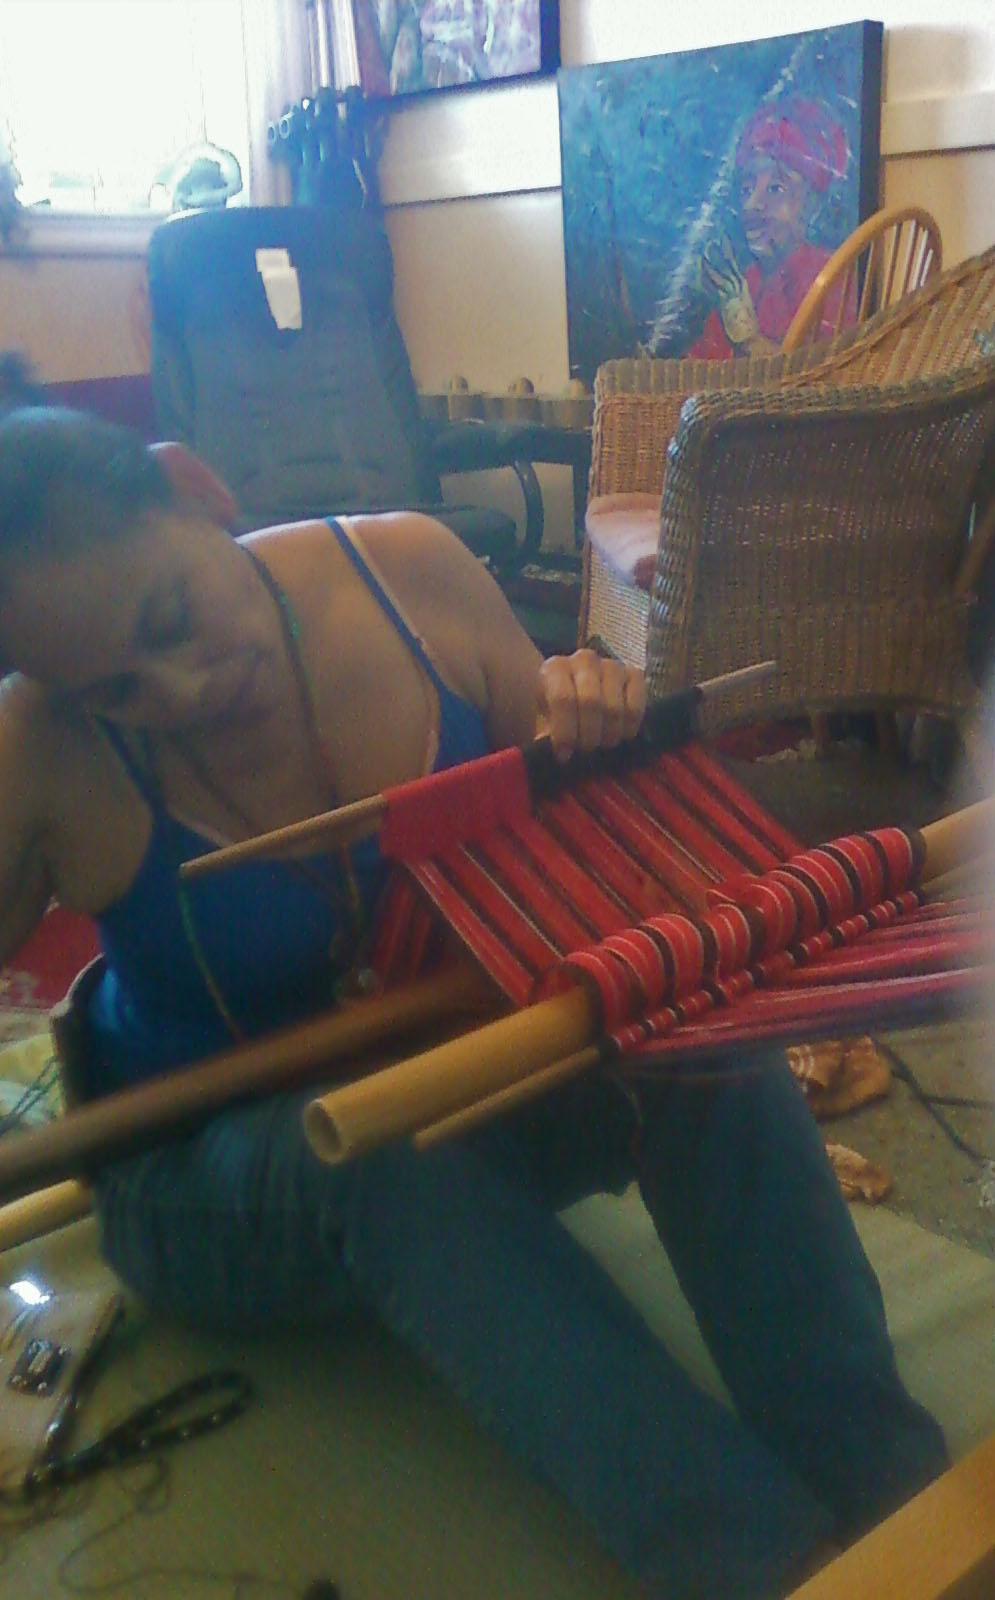 Working on tapis: Summer weaving at home...